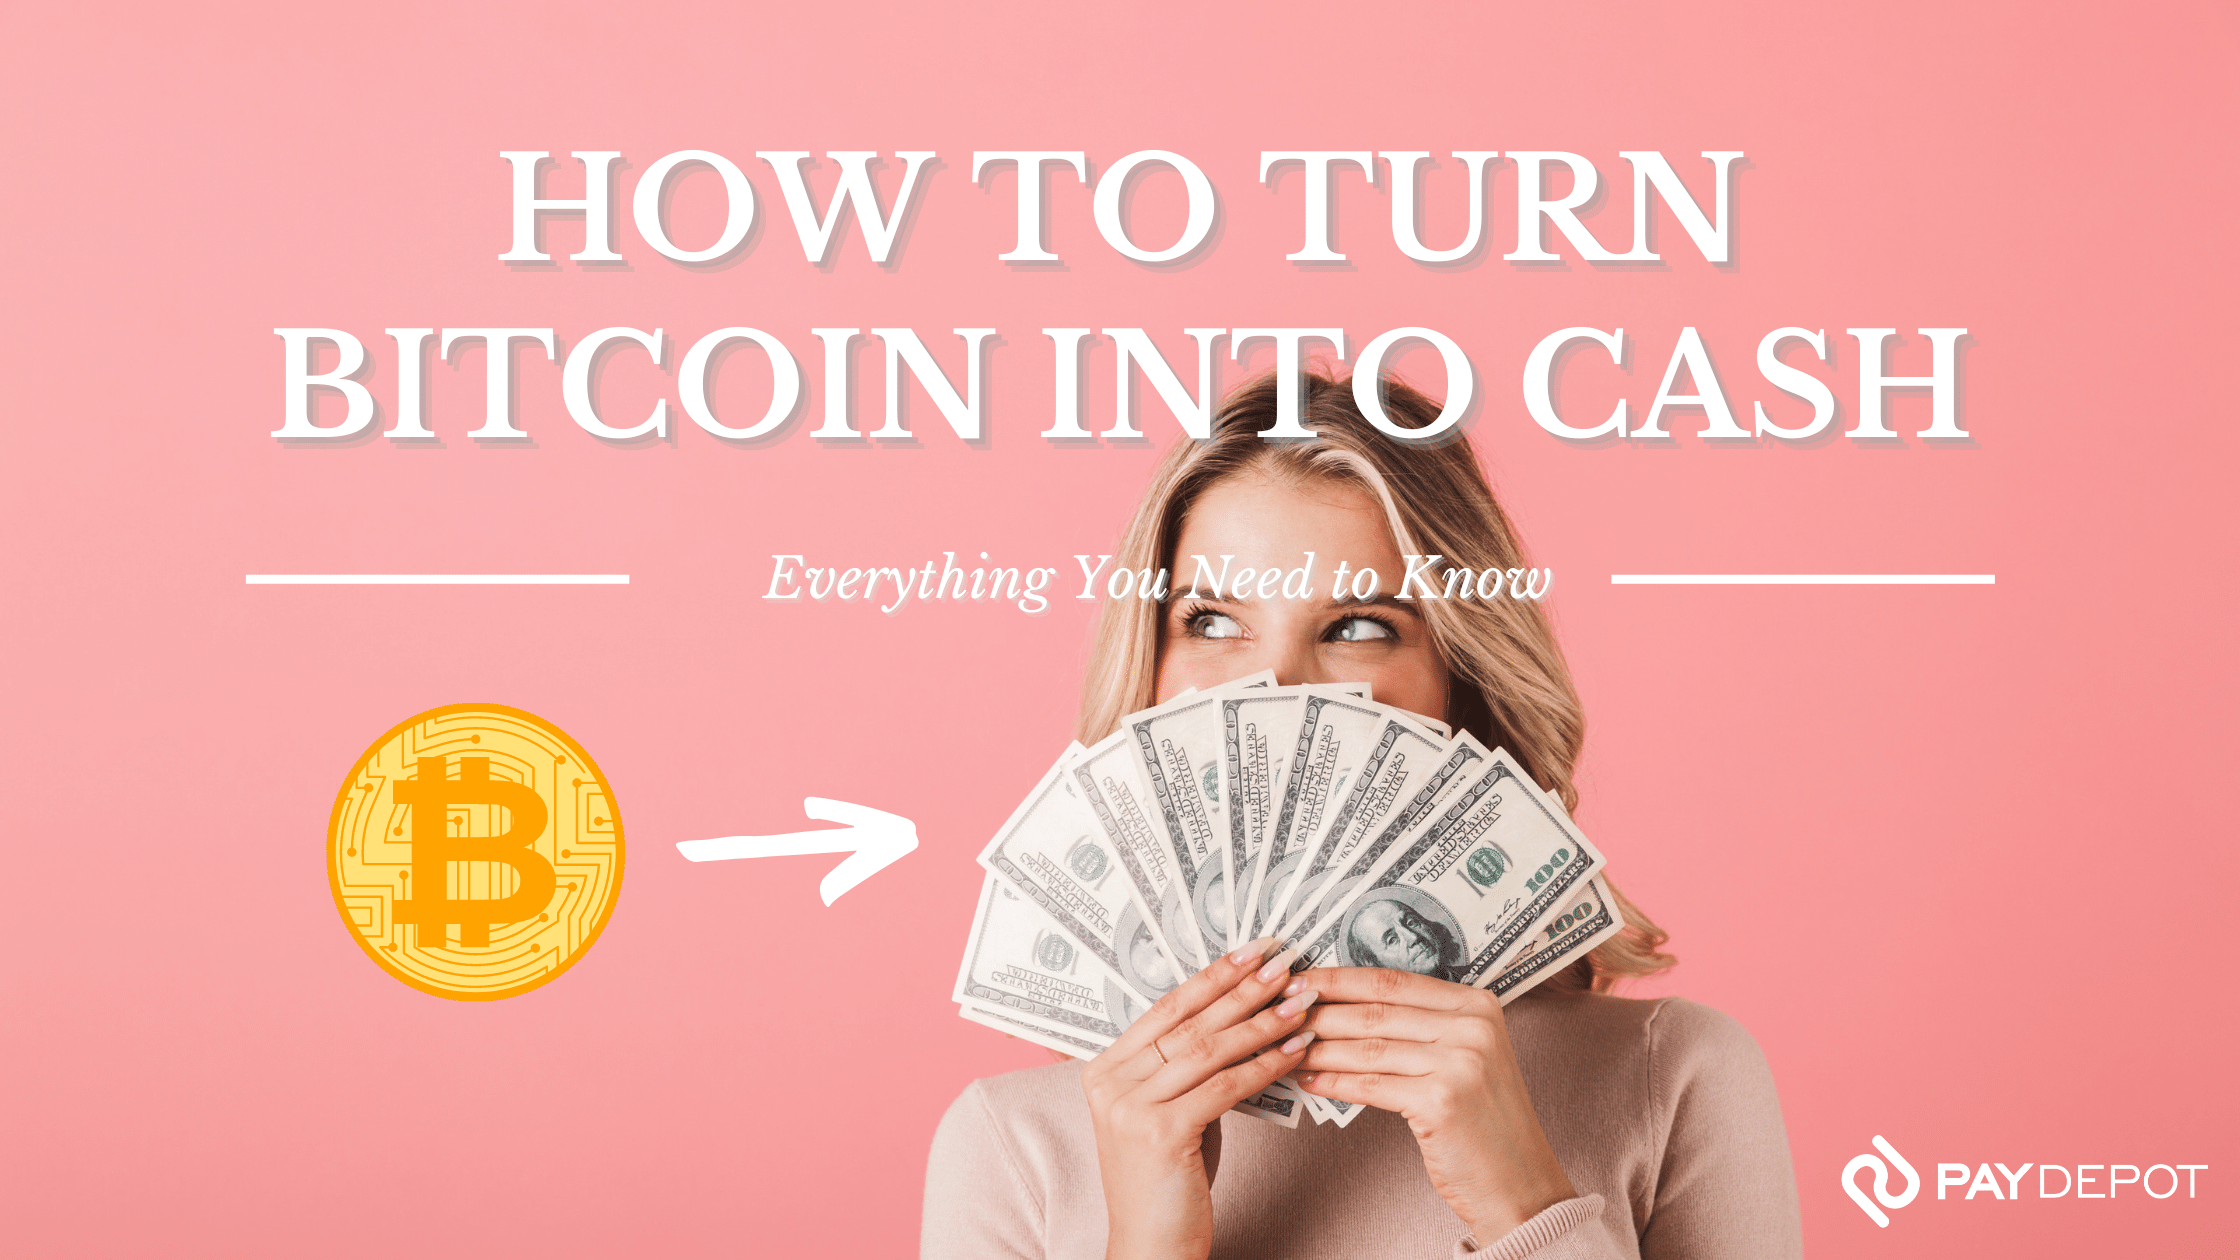 How to Turn Bitcoin into Cash